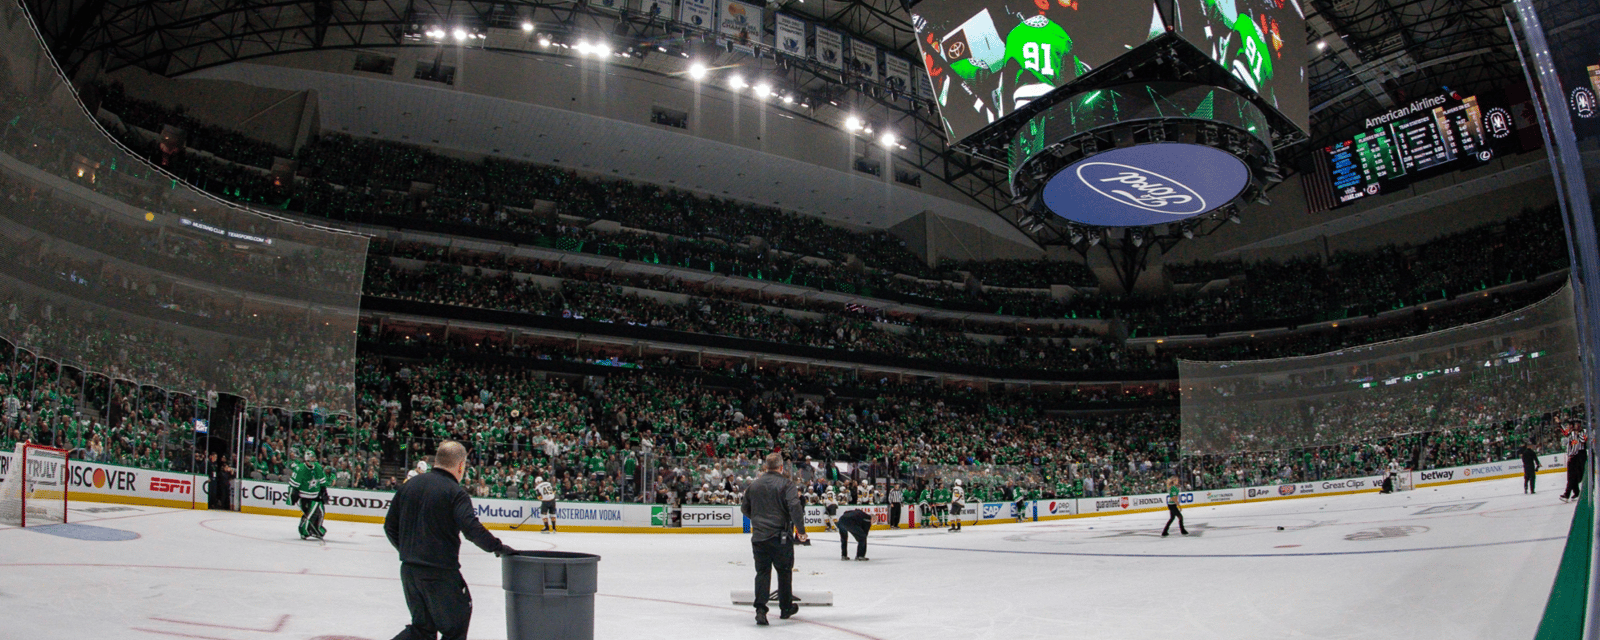 Dallas Stars CEO issues apology for fan behavior 